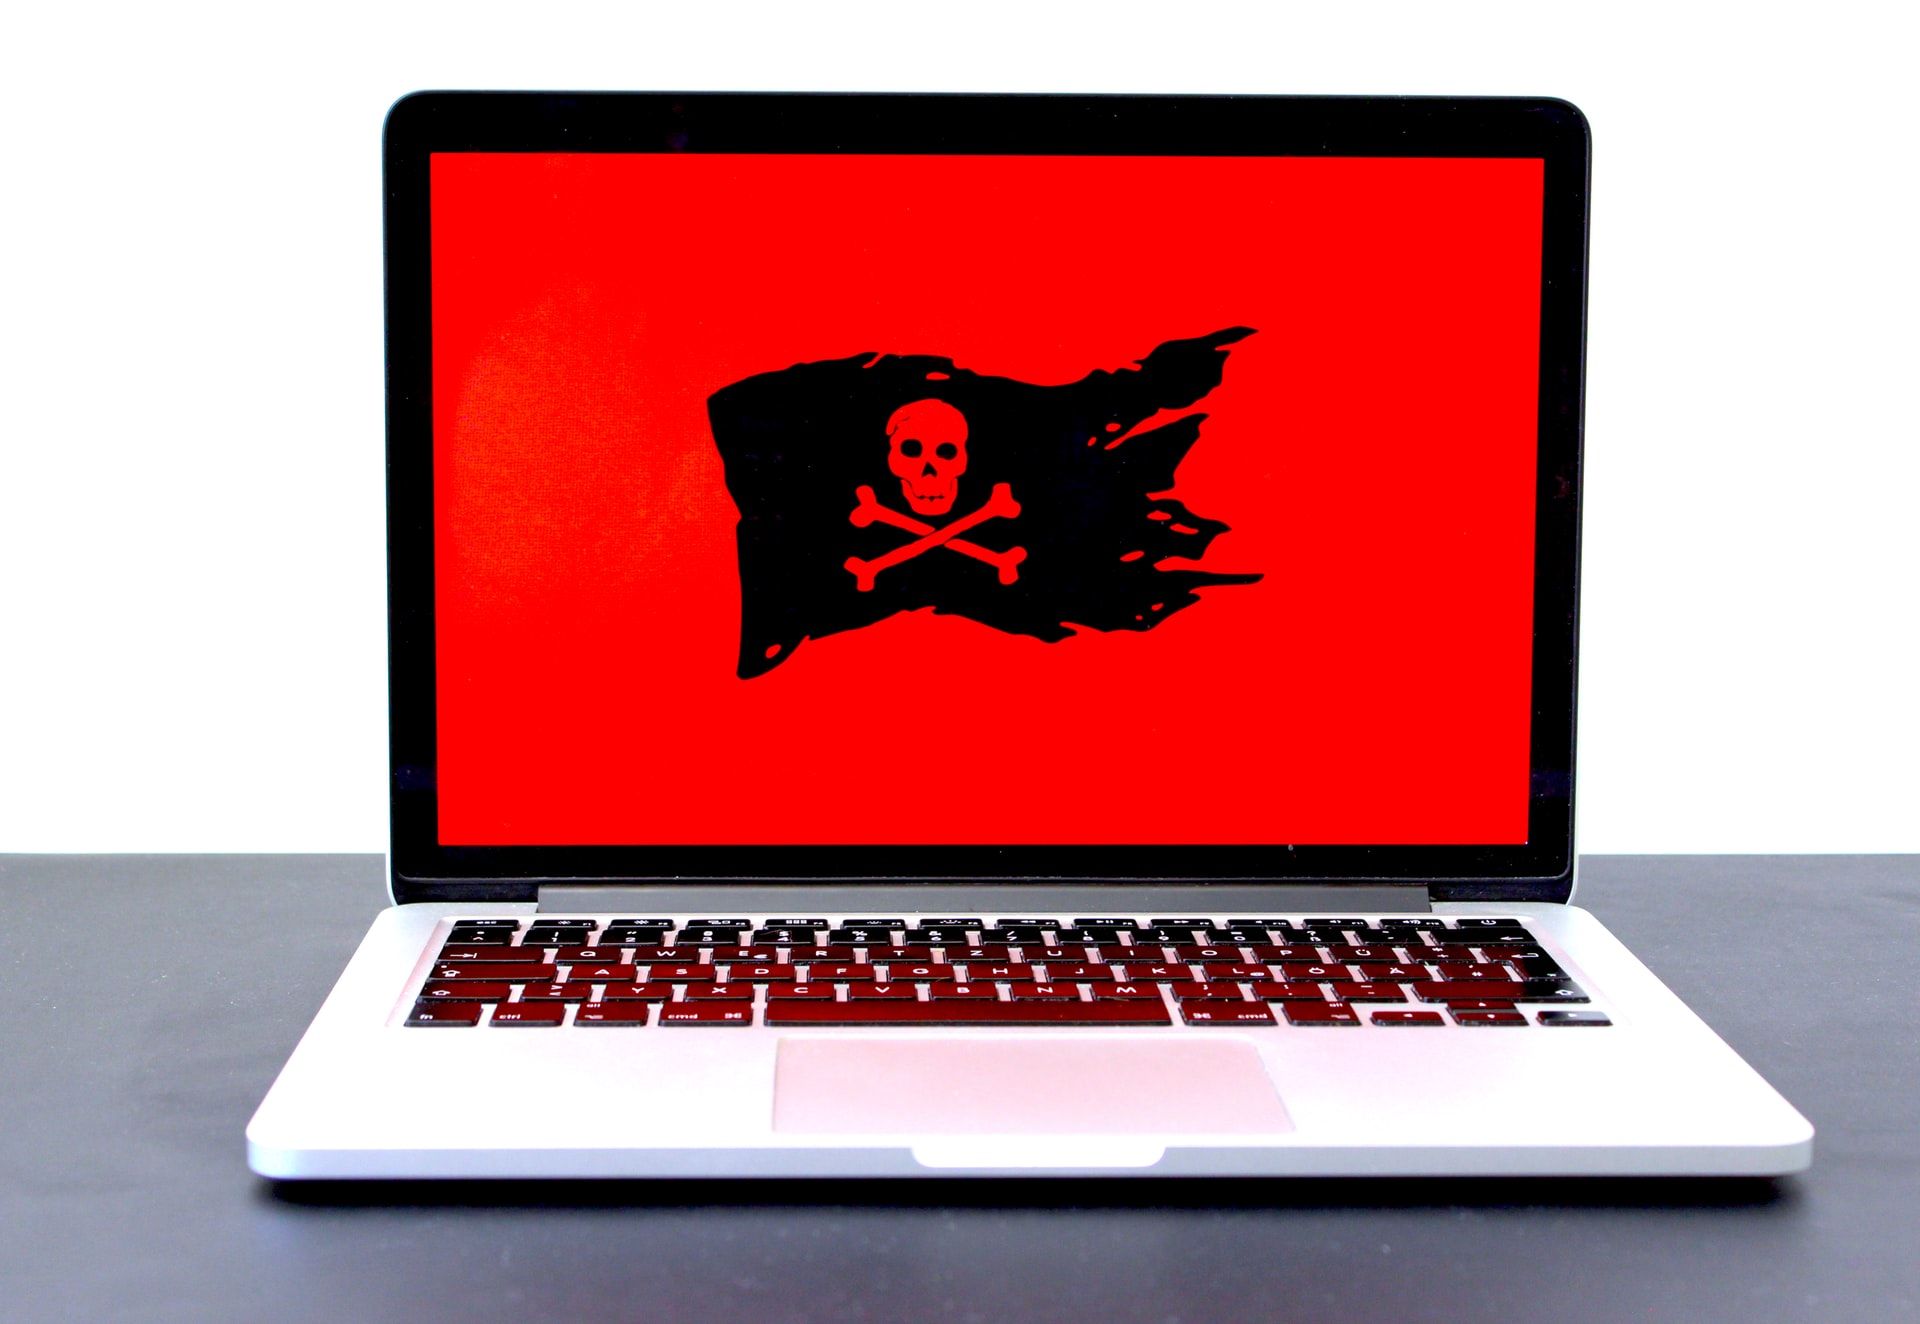 Laptop with red screen and black pirate flag